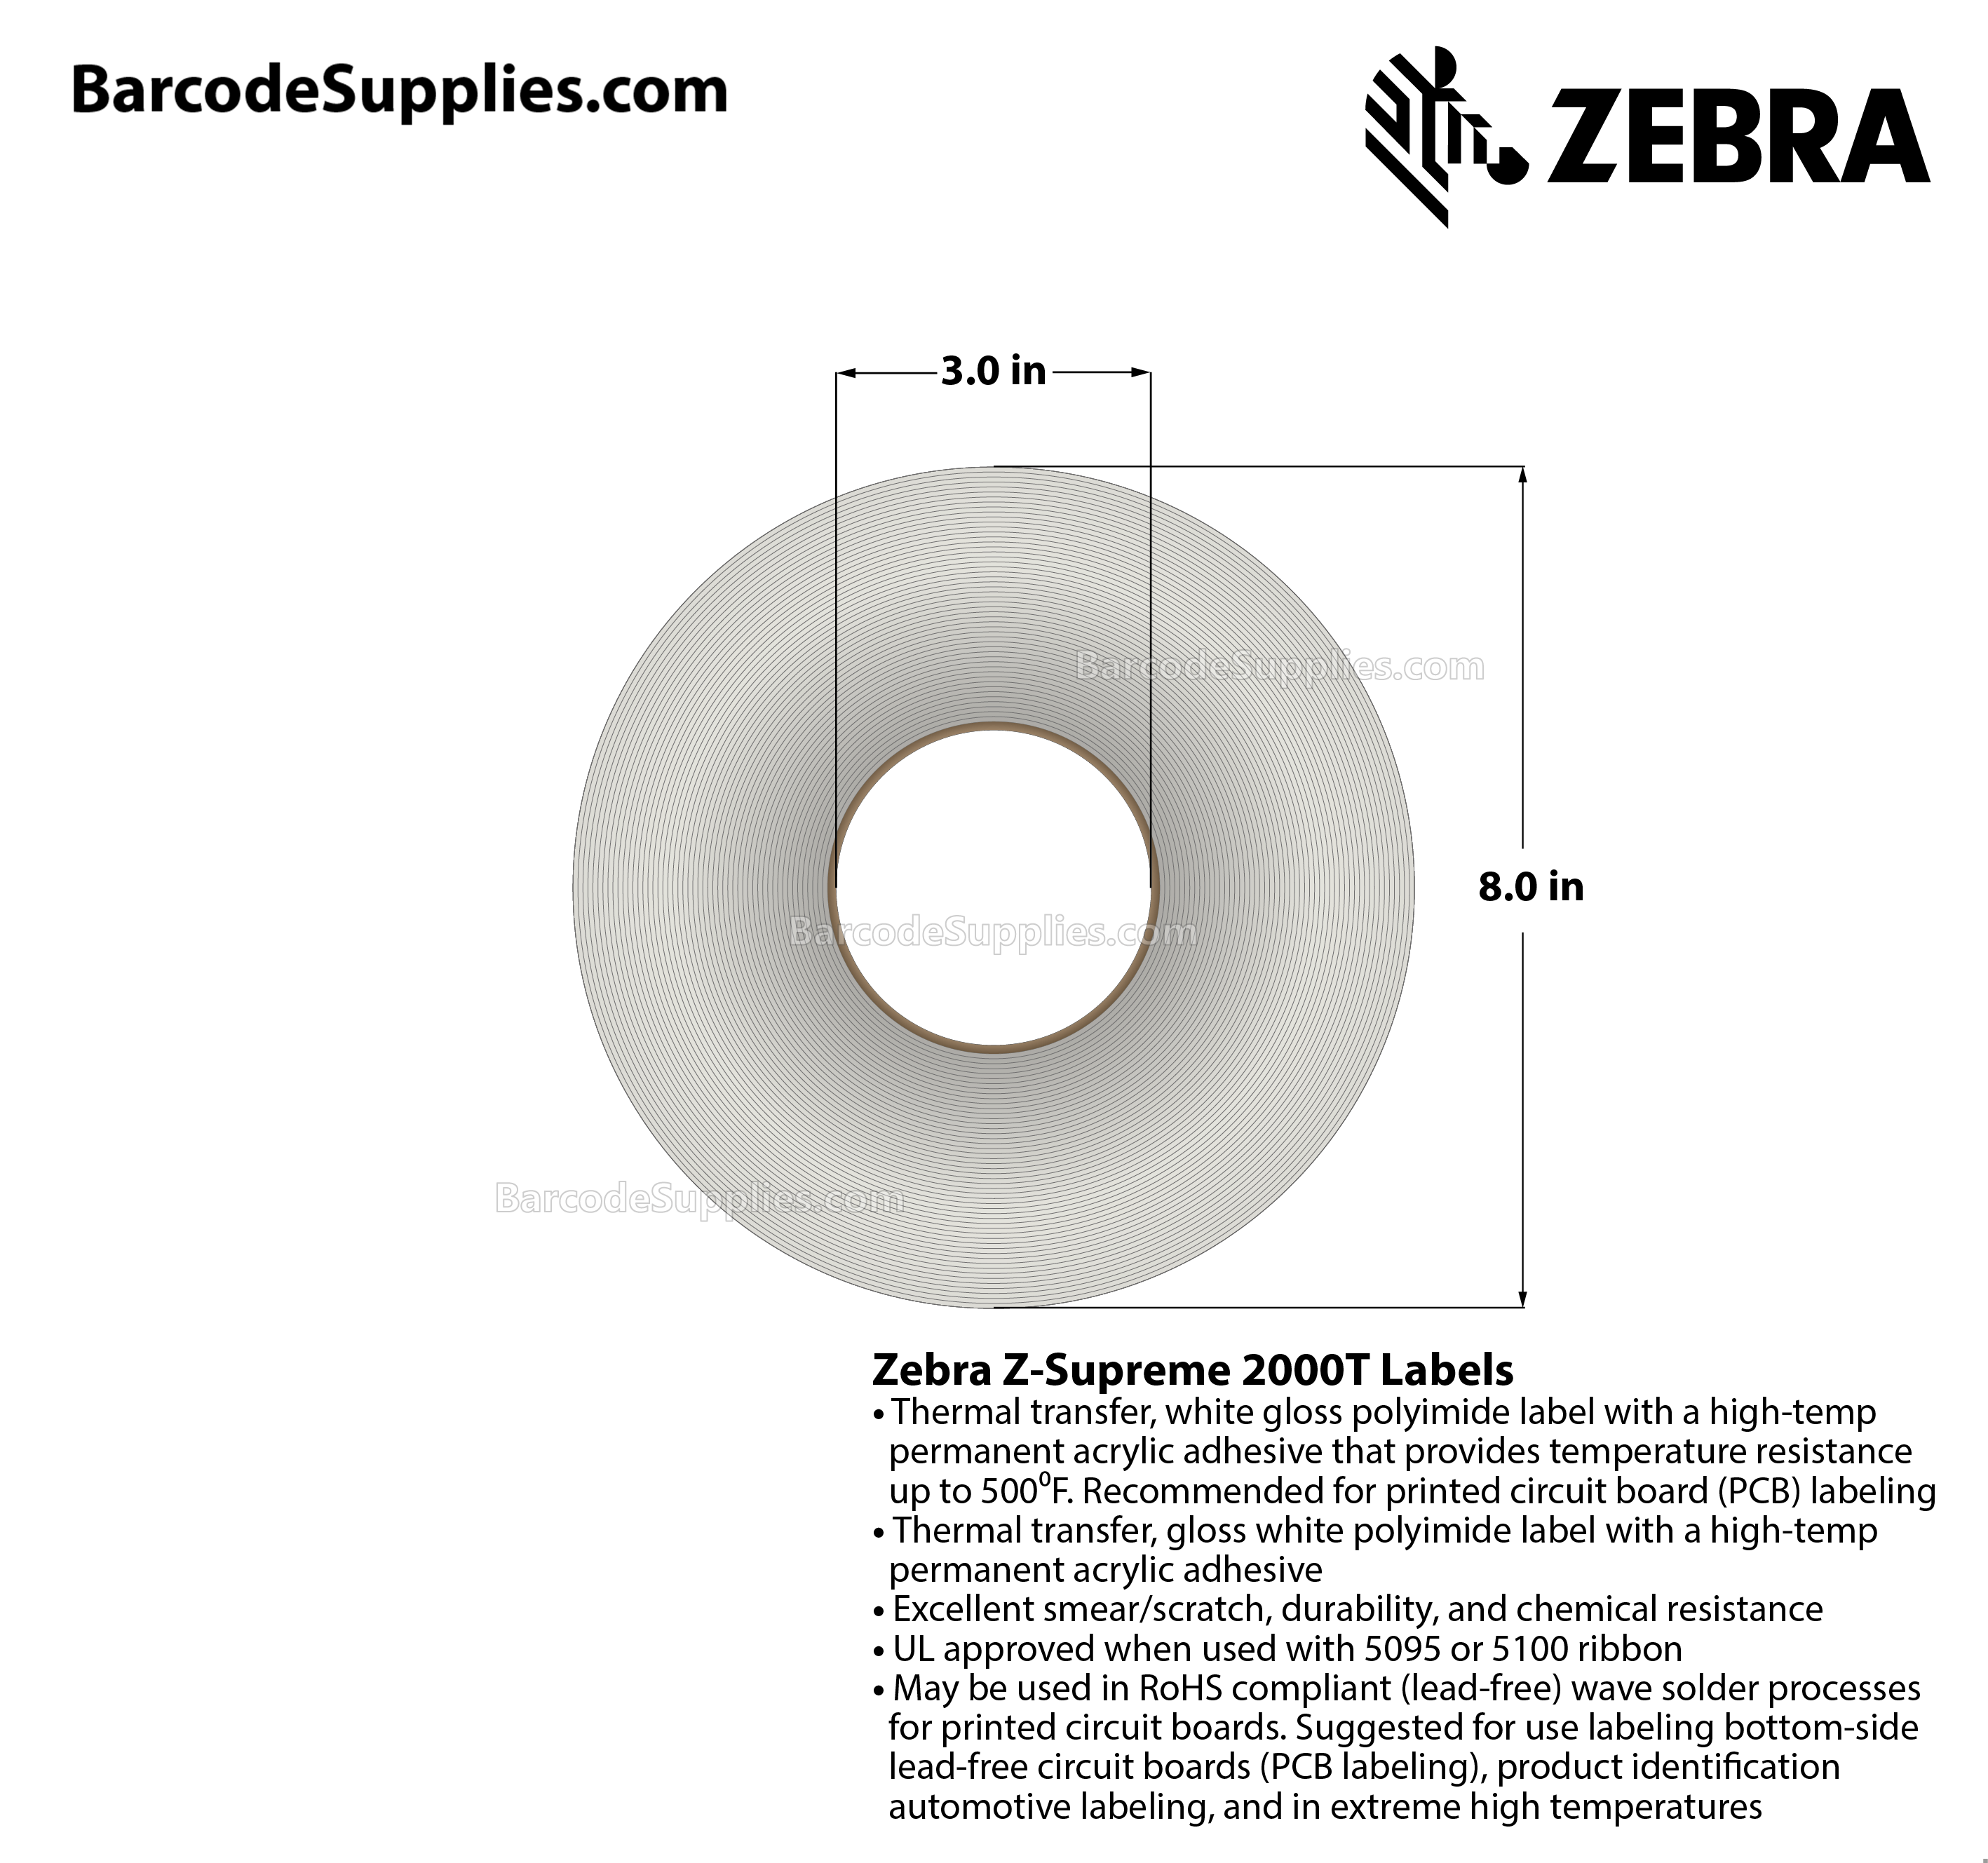 0.75 x 0.25 Thermal Transfer White Z-Supreme 2000T White Labels With High-temp Adhesive - Perforated - 10000 Labels Per Roll - Carton Of 1 Rolls - 10000 Labels Total - MPN: 10015764